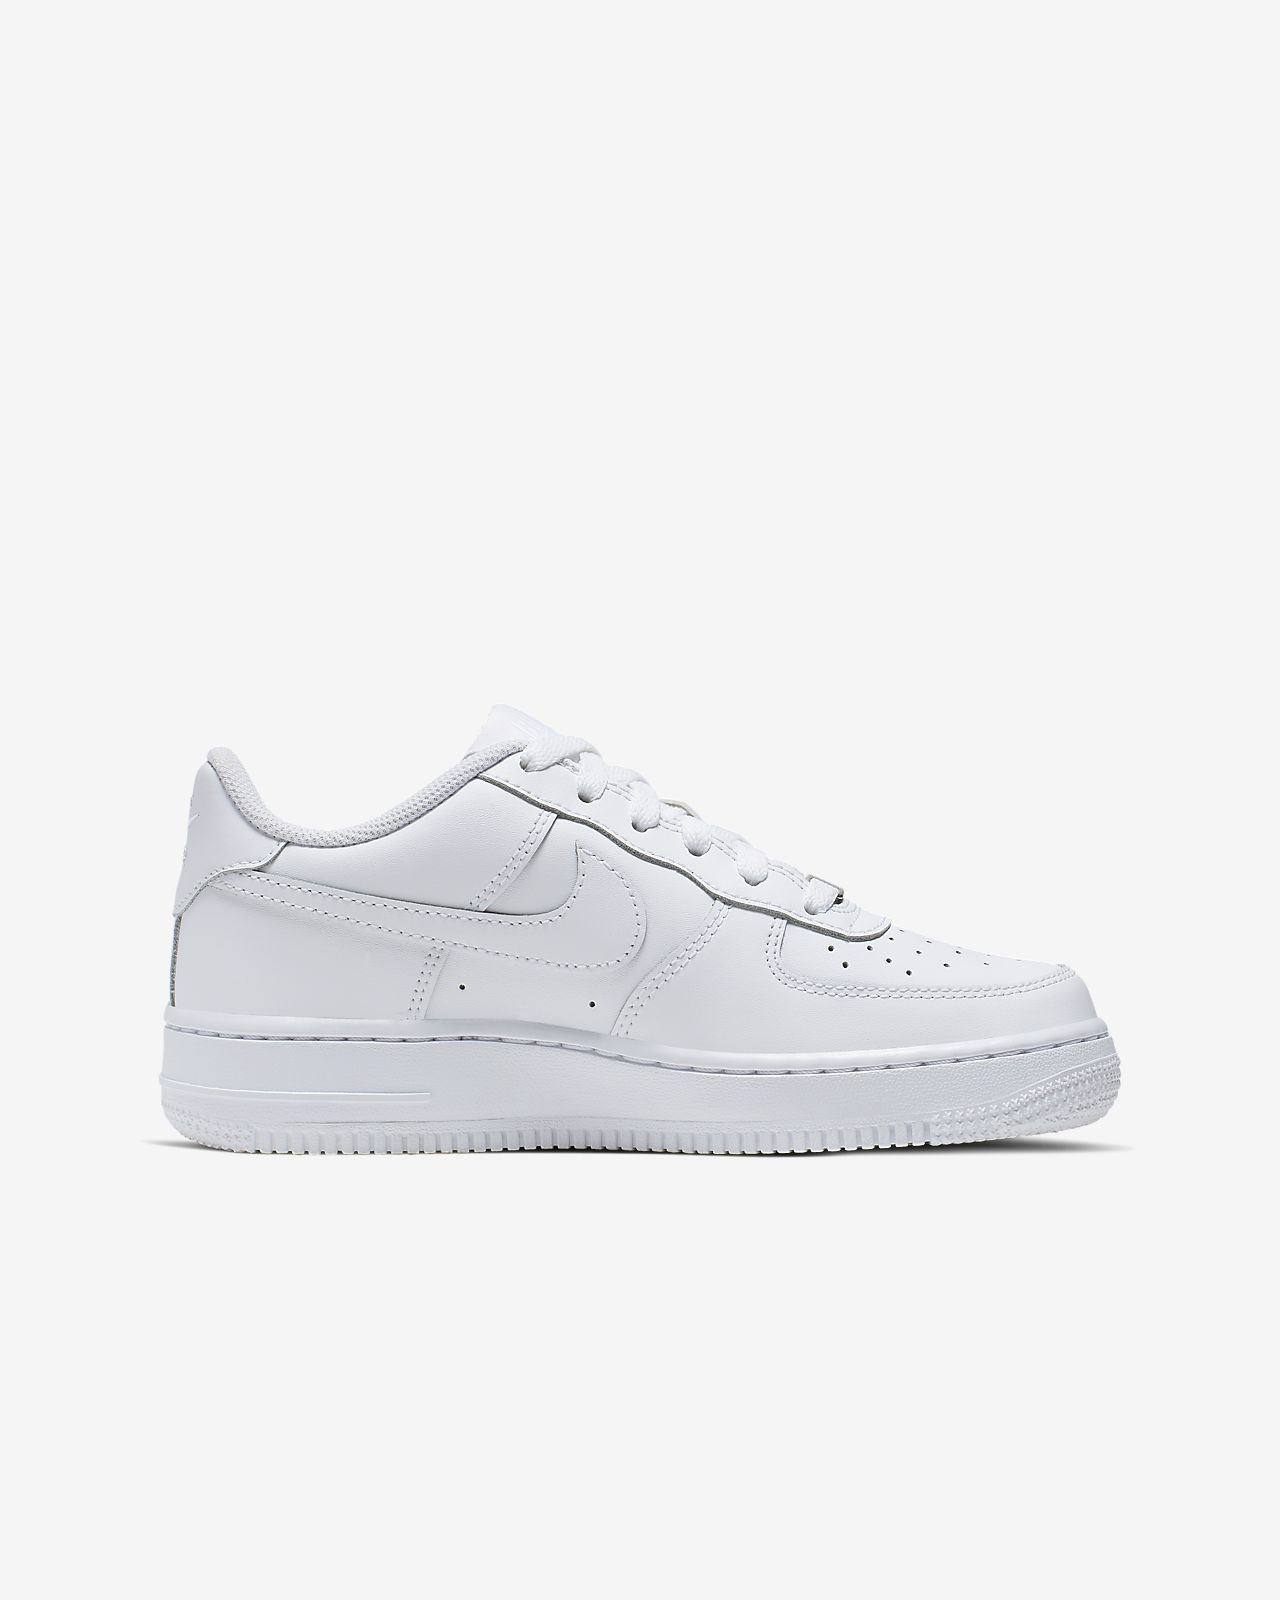 nike air force youth white